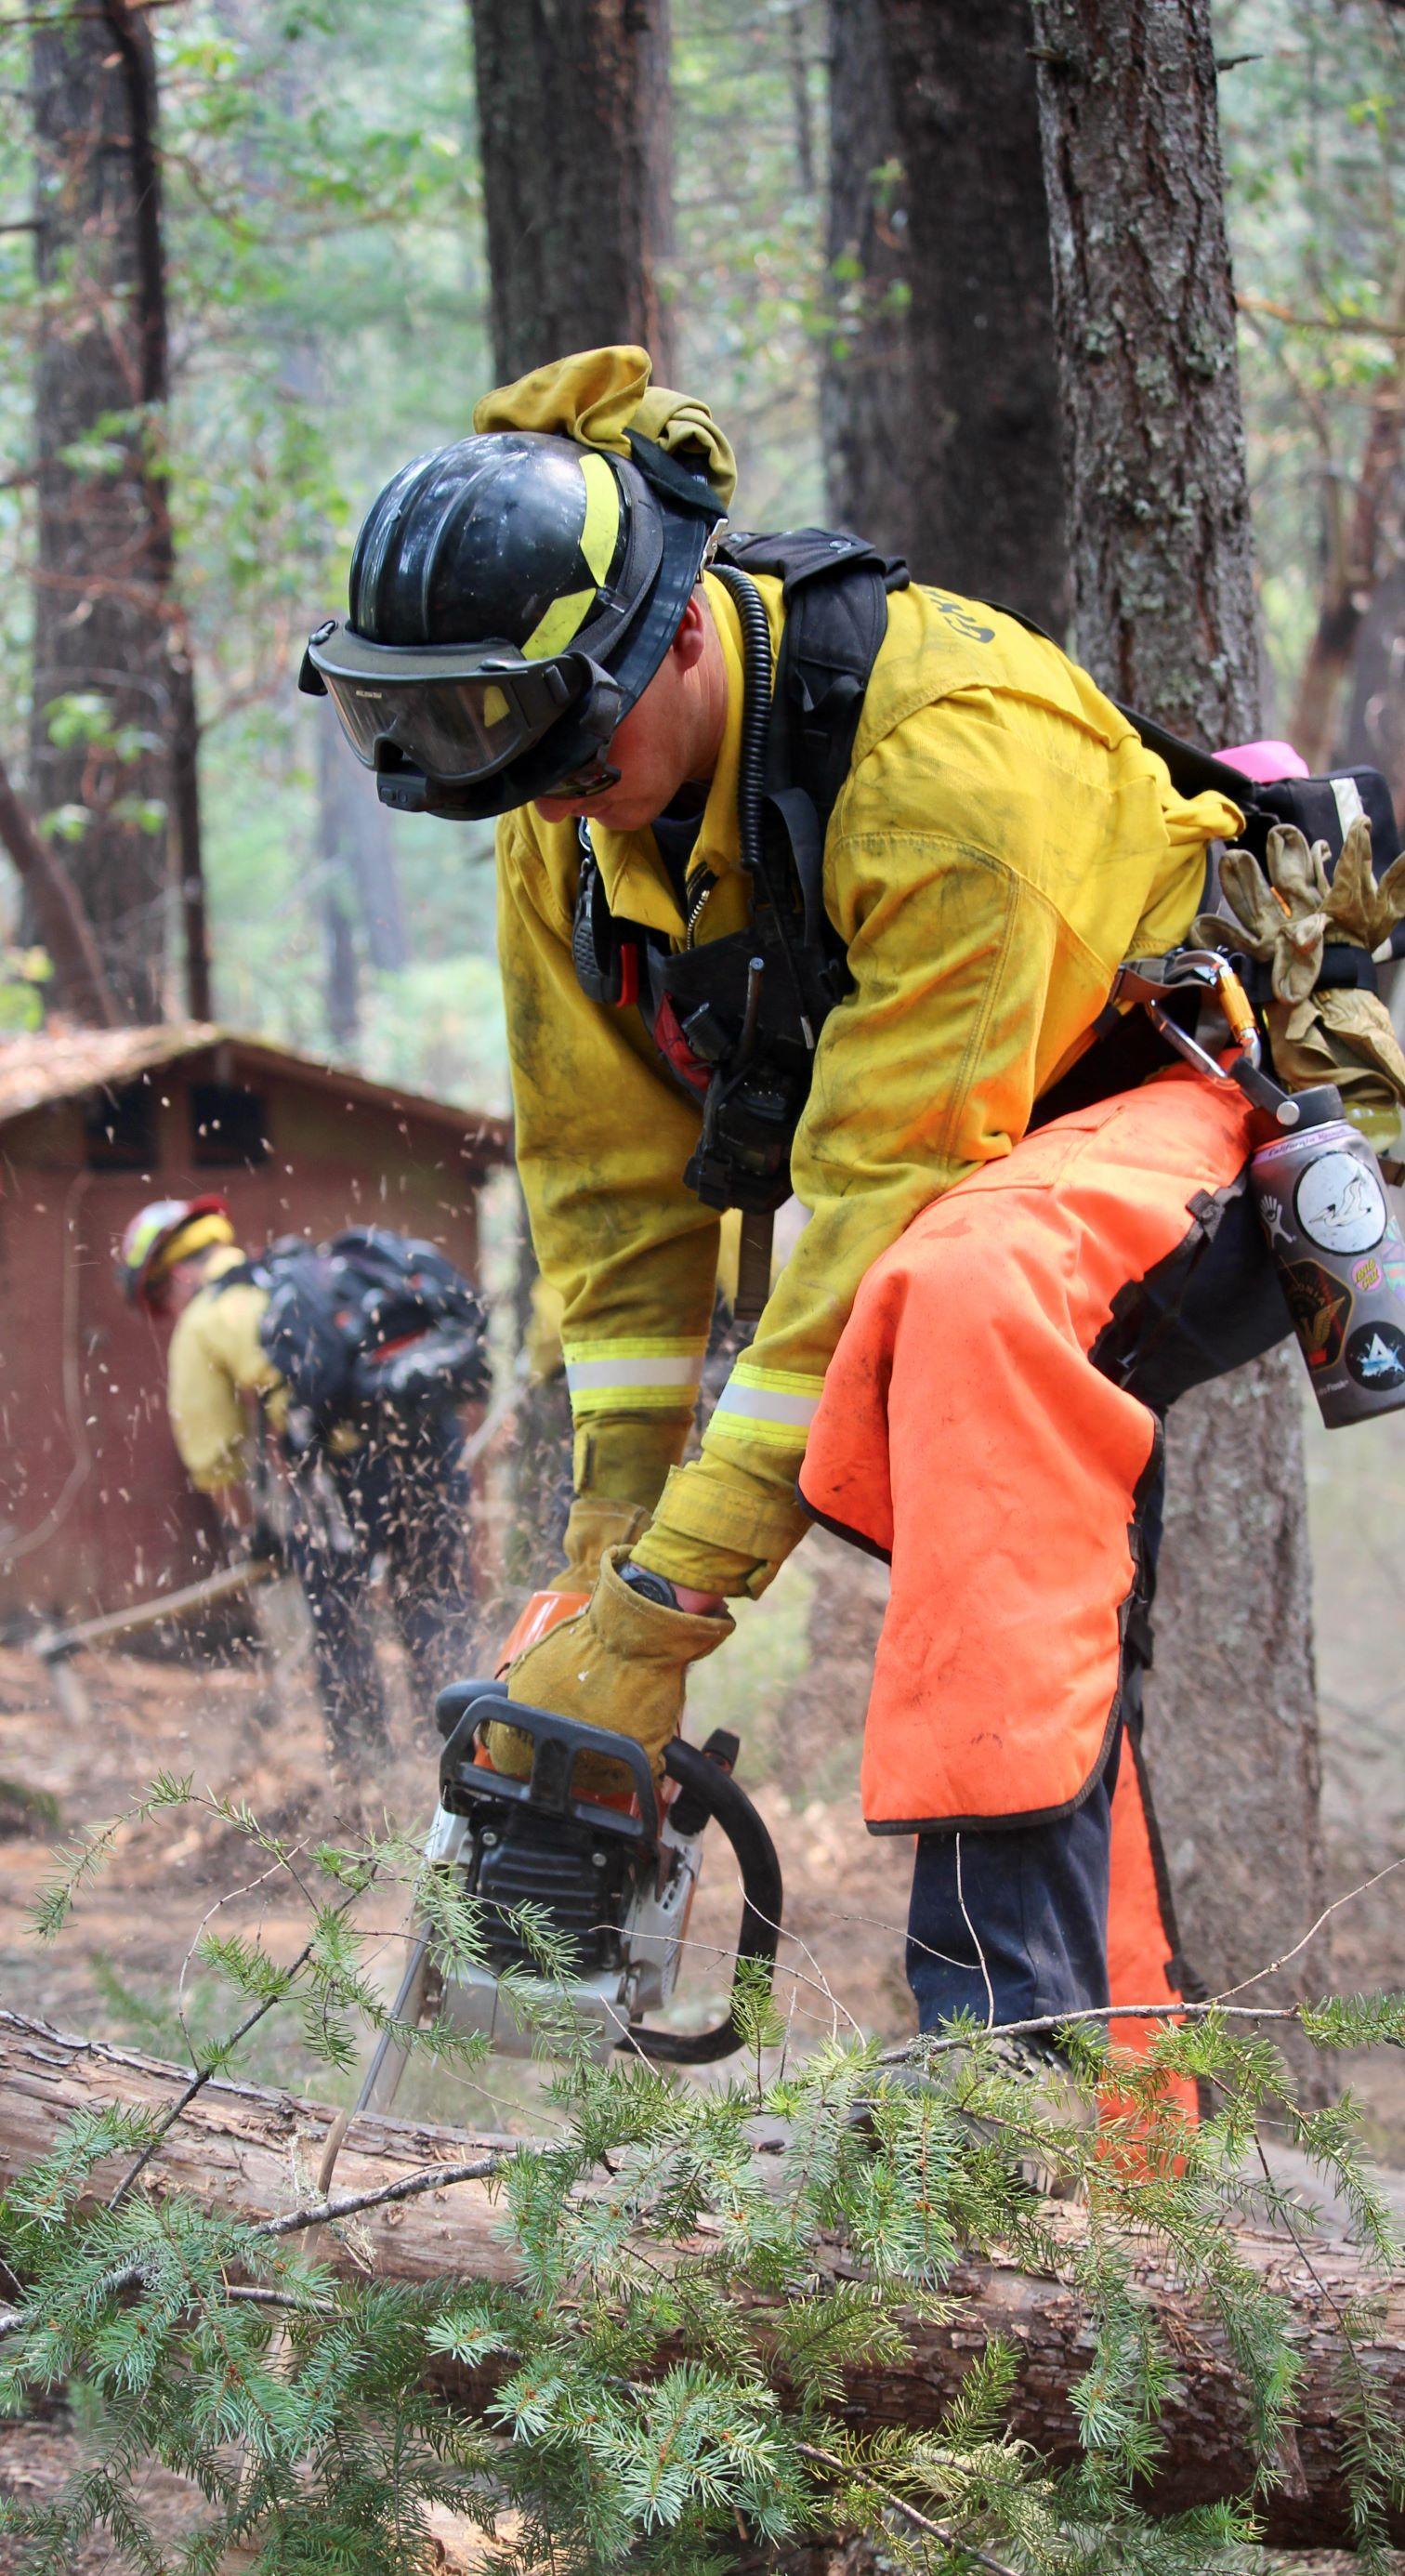 A firefighter with a chainsaw is cutting a small log lying on the ground into chunks. Another firefighter in the background is using a hoe-like tool to scrape fuels off the surface of the ground. This is part of building a fire line behind structures.